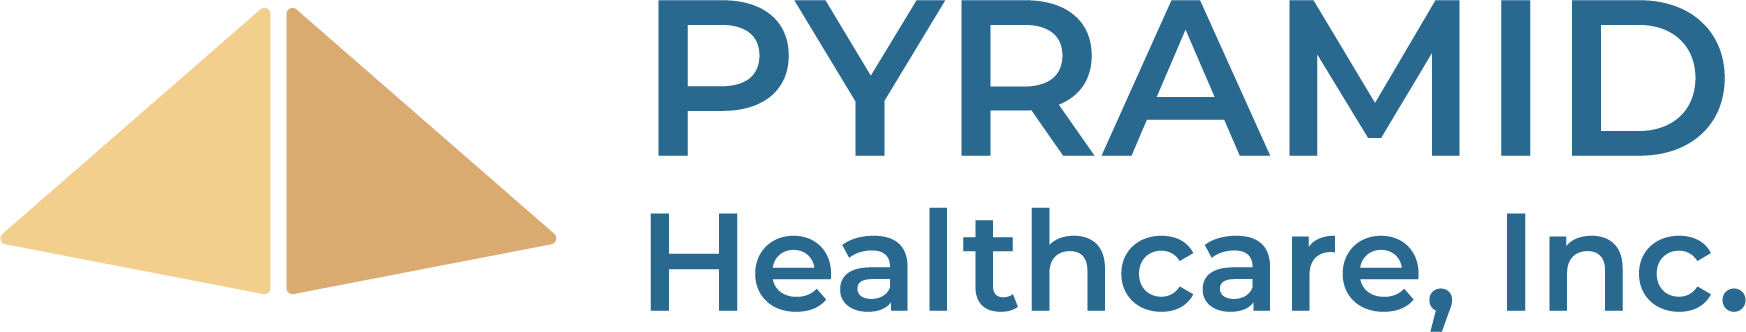 Foundations medical services in butler pyramid healthcare